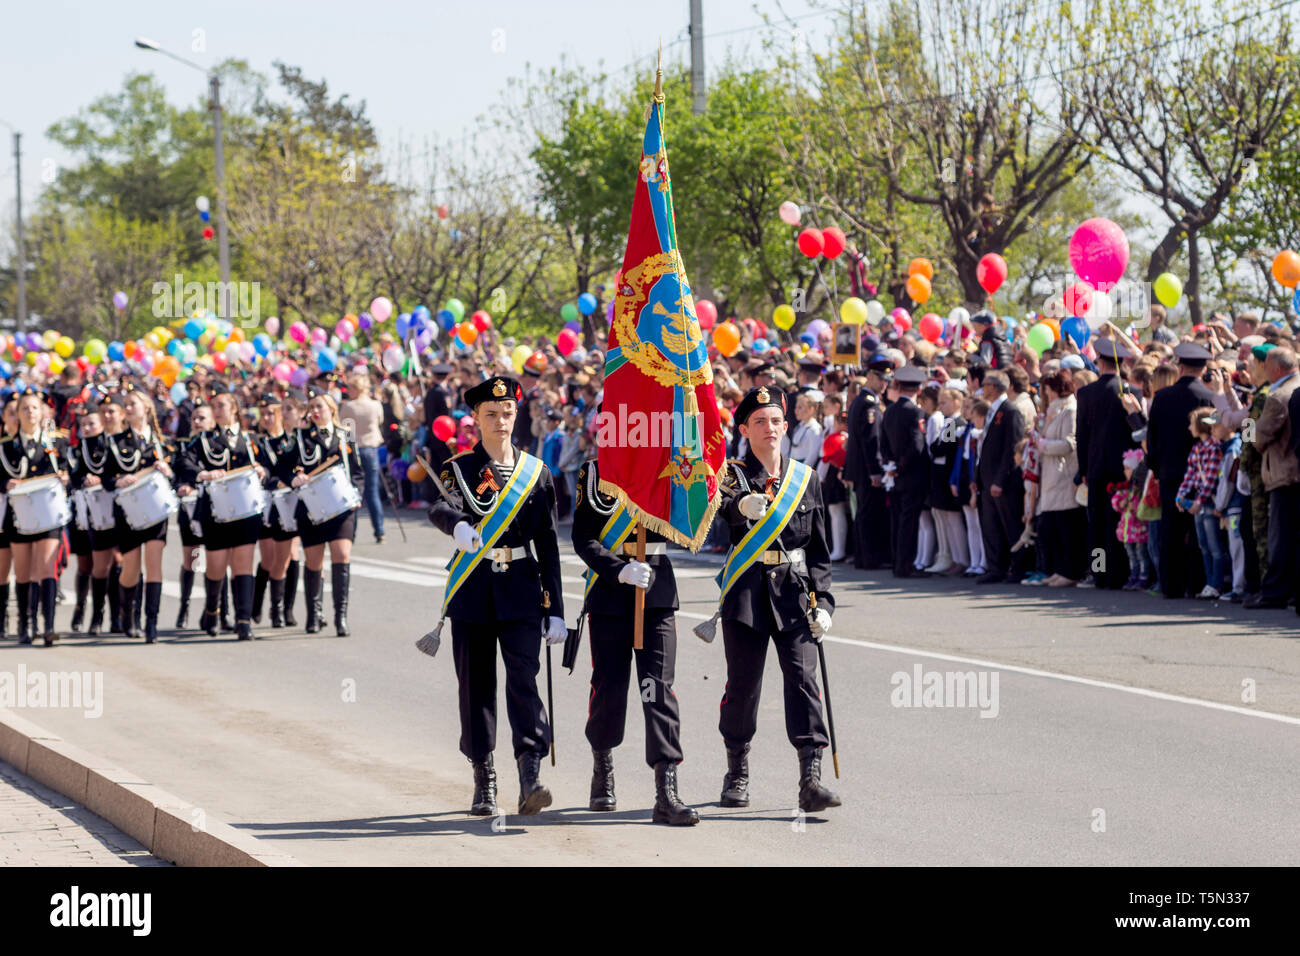 Russia, Nakhodka, 05/09/2017. Cadets in parade uniform with military flag march on parade on annual Victory Day on May 9. Holiday in honor of victory  Stock Photo